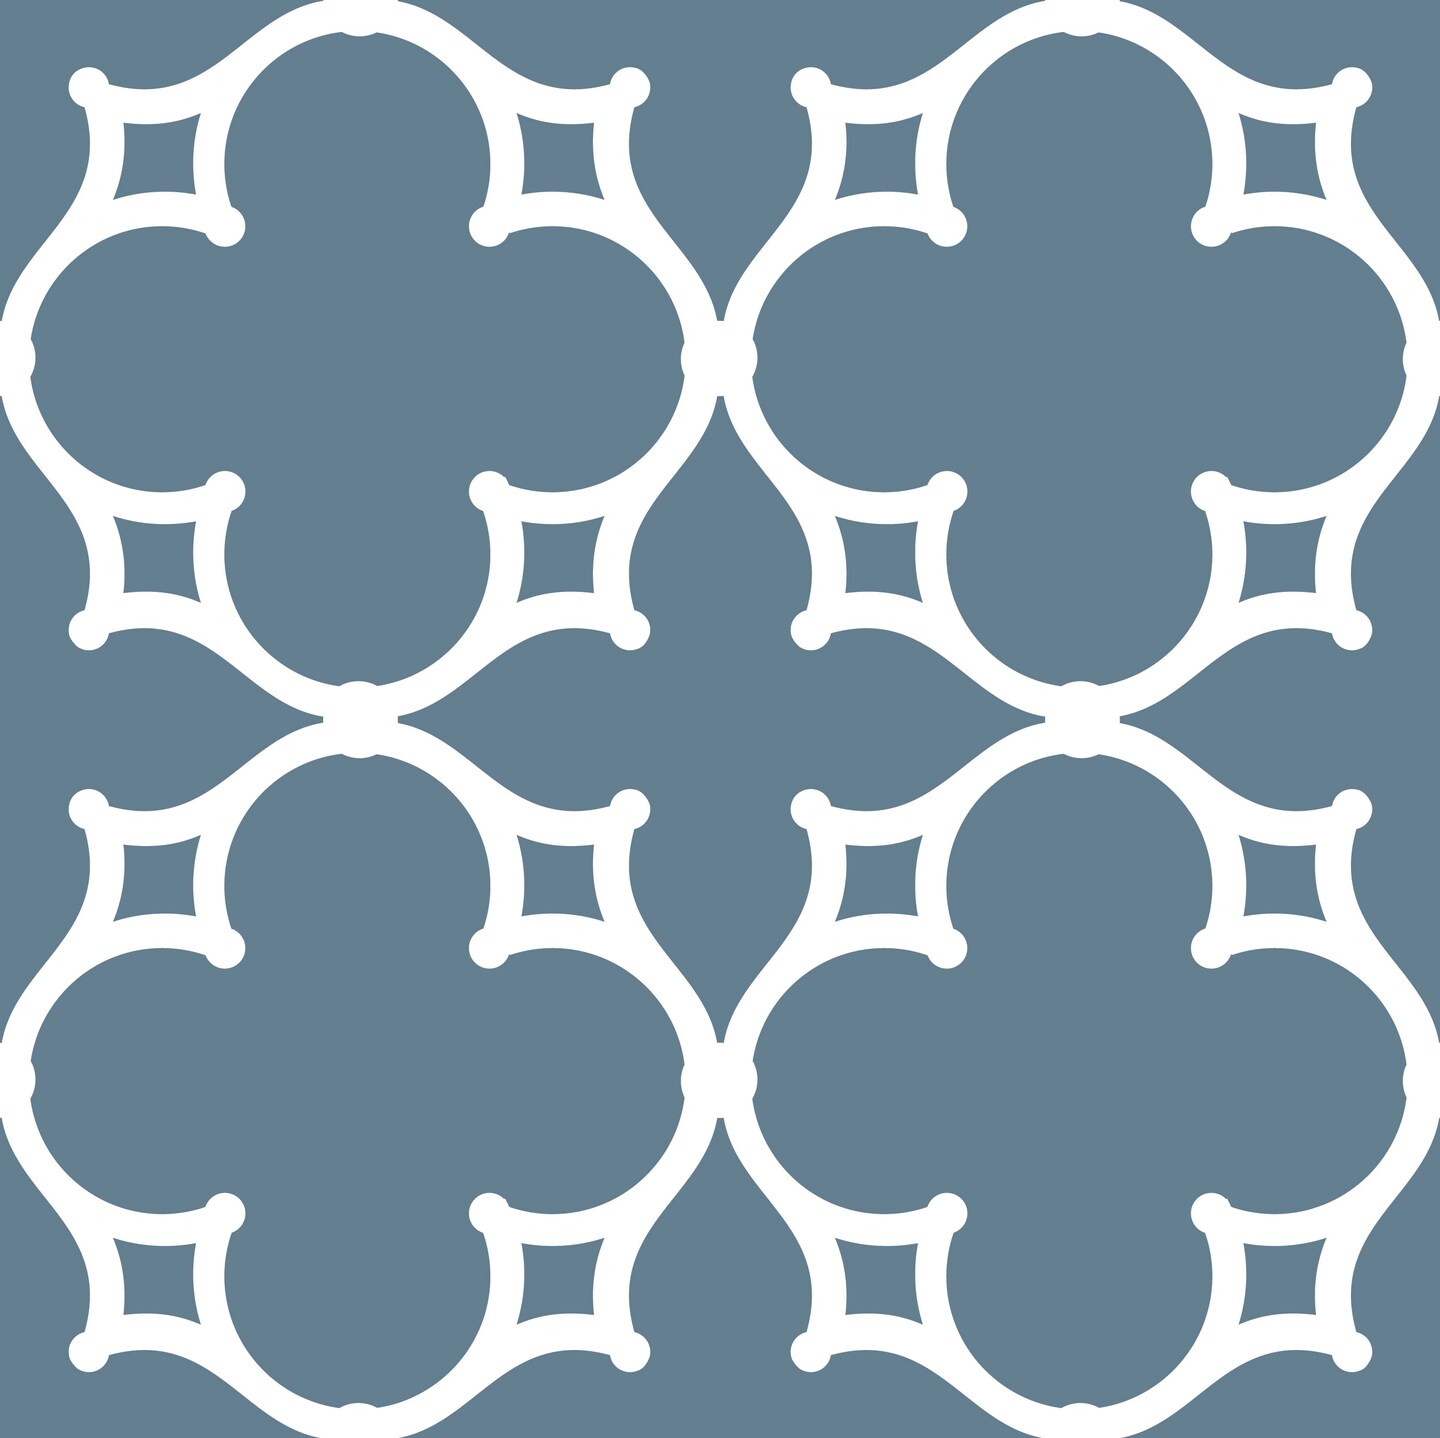 8-Inch Parisian Fretwork All Over Wall Stencil | 3713B by Designer Stencils | Pattern Stencils | Reusable Stencils for Painting | Safe &#x26; Reusable Template for Wall Decor | Try This Stencil Instead of a Wallpaper | Easy to Use &#x26; Clean